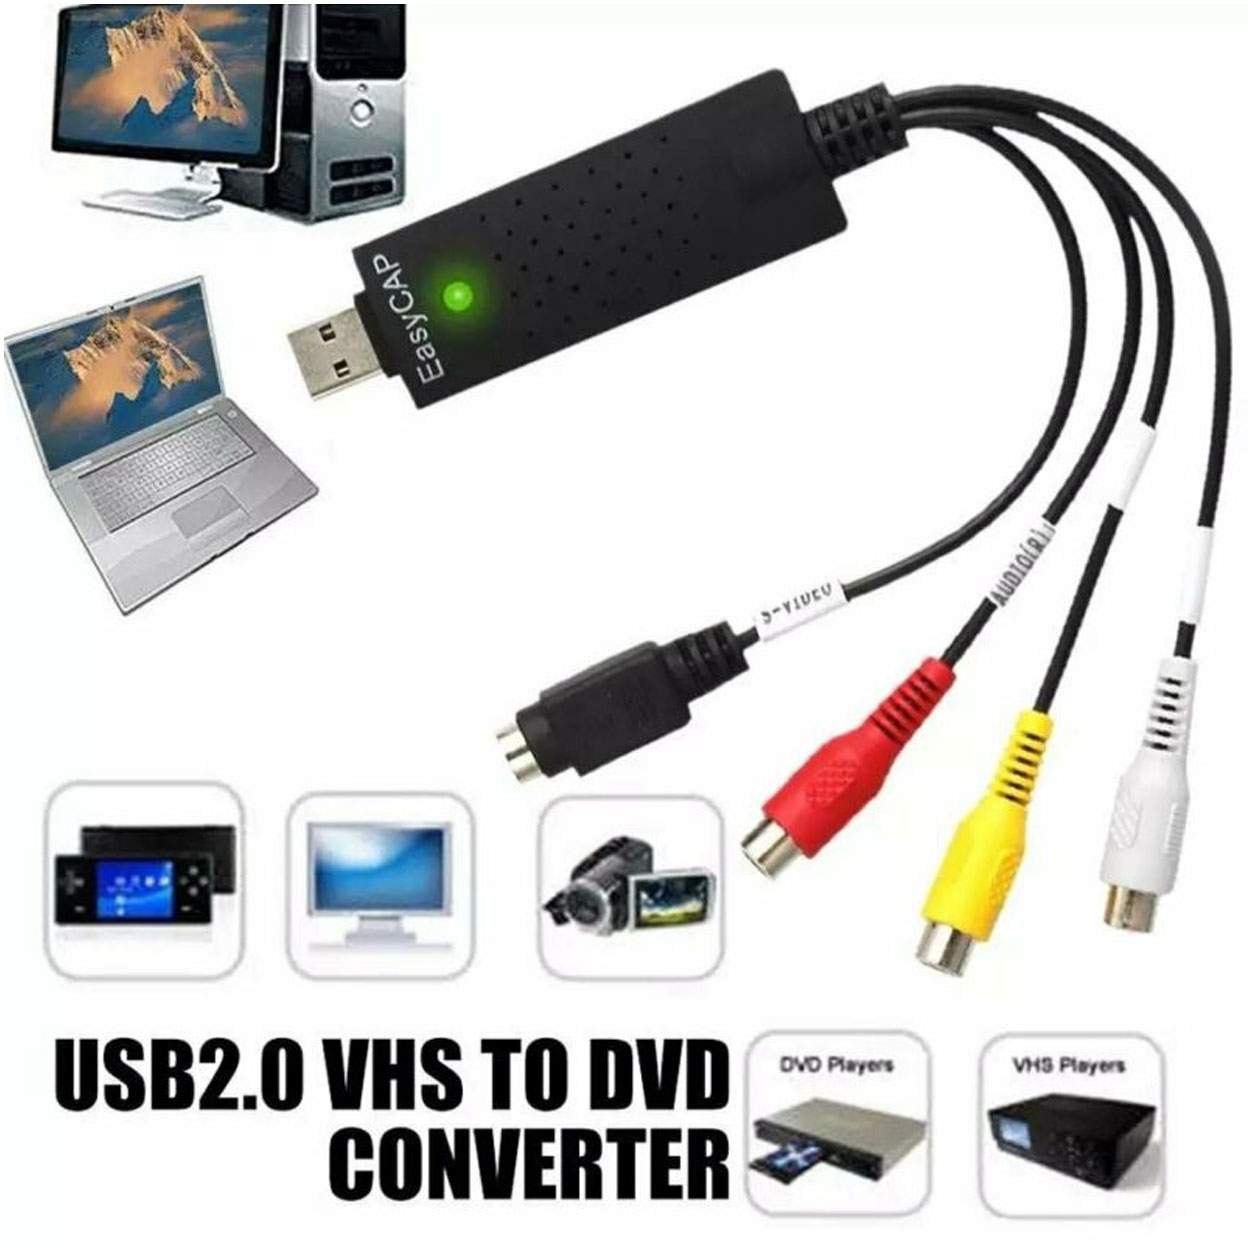 VRISH TV-out Cable USB 2.0 Easycap Dc60 TV DVD VHS Video Adapter Capture  Card Supports Windows Xp/7/Vista 32 - Price History